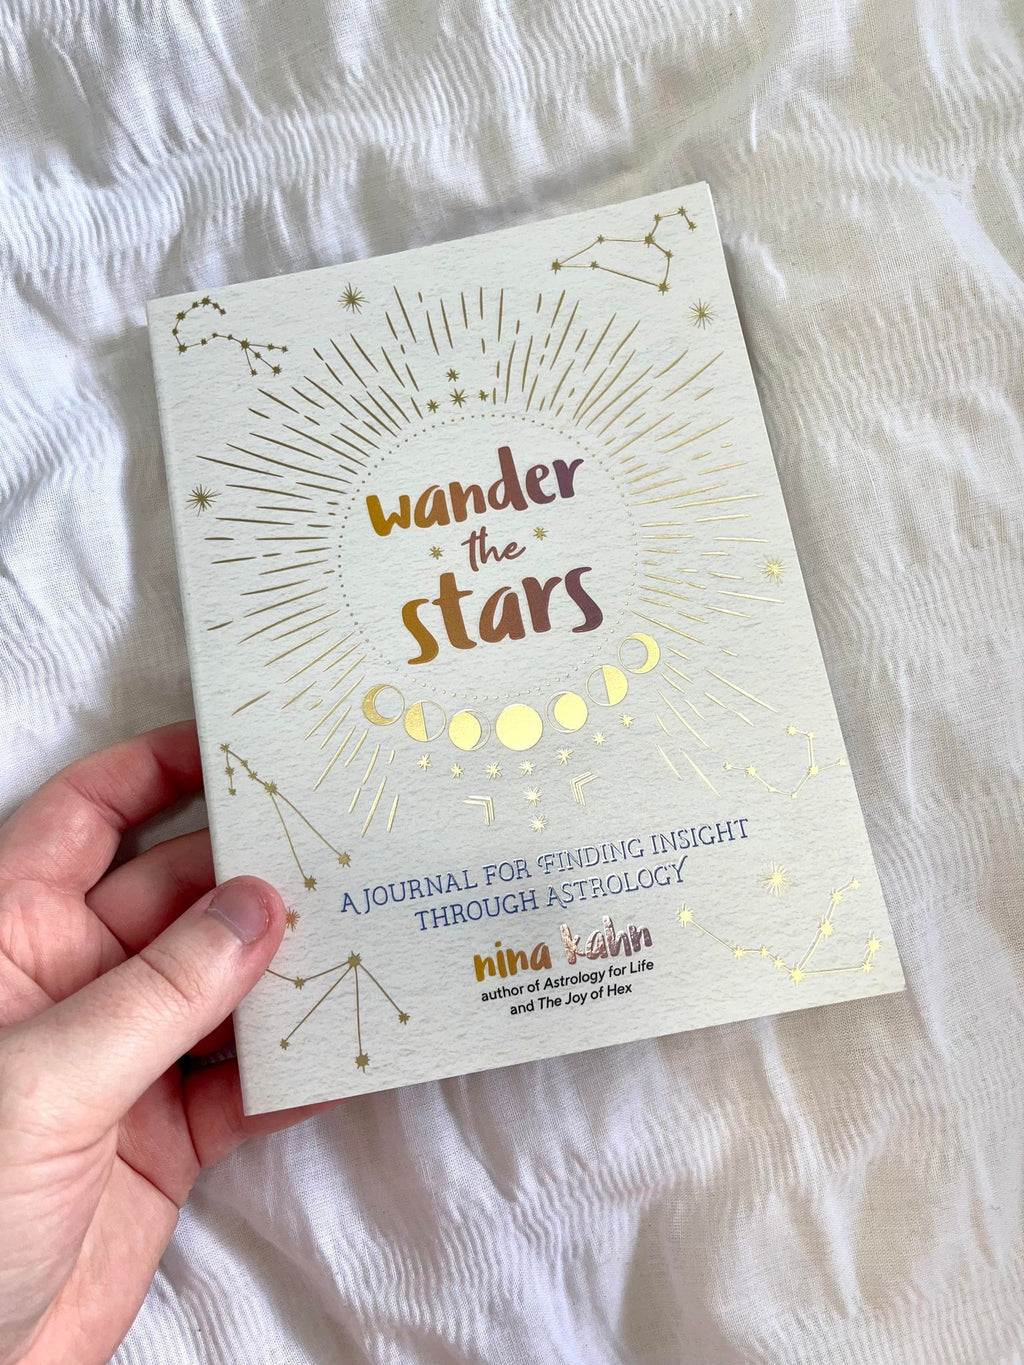 Wander the Stars: A Journal for Finding Insight Through Astrology by Nina Kahn